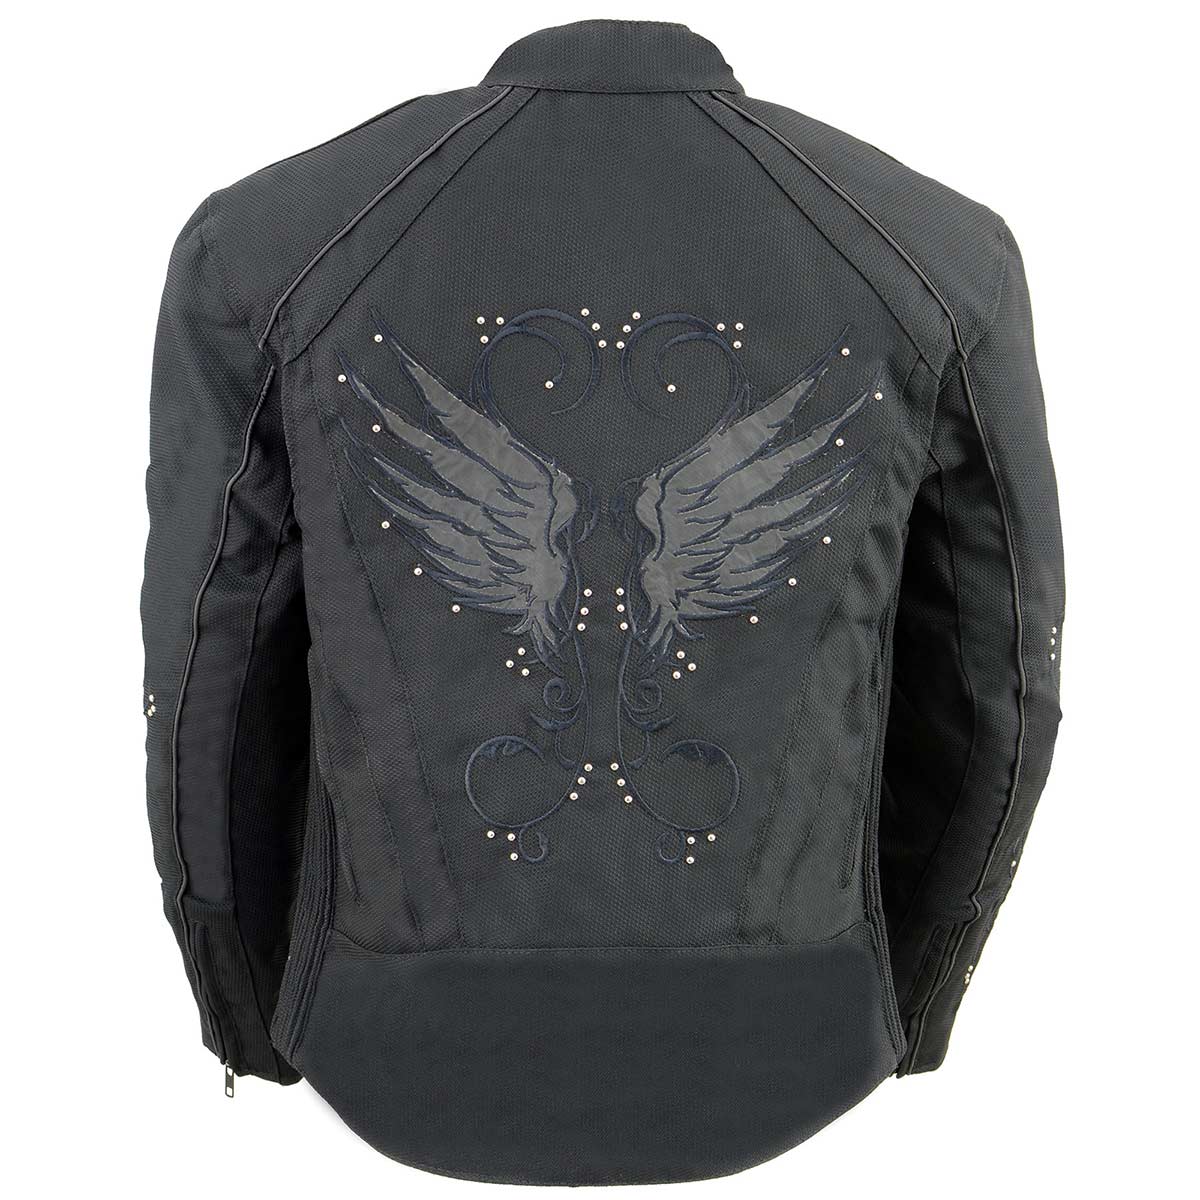 Milwaukee Leather SH1954 Women's Black Textile Jacket with Stud and Wings Detailing